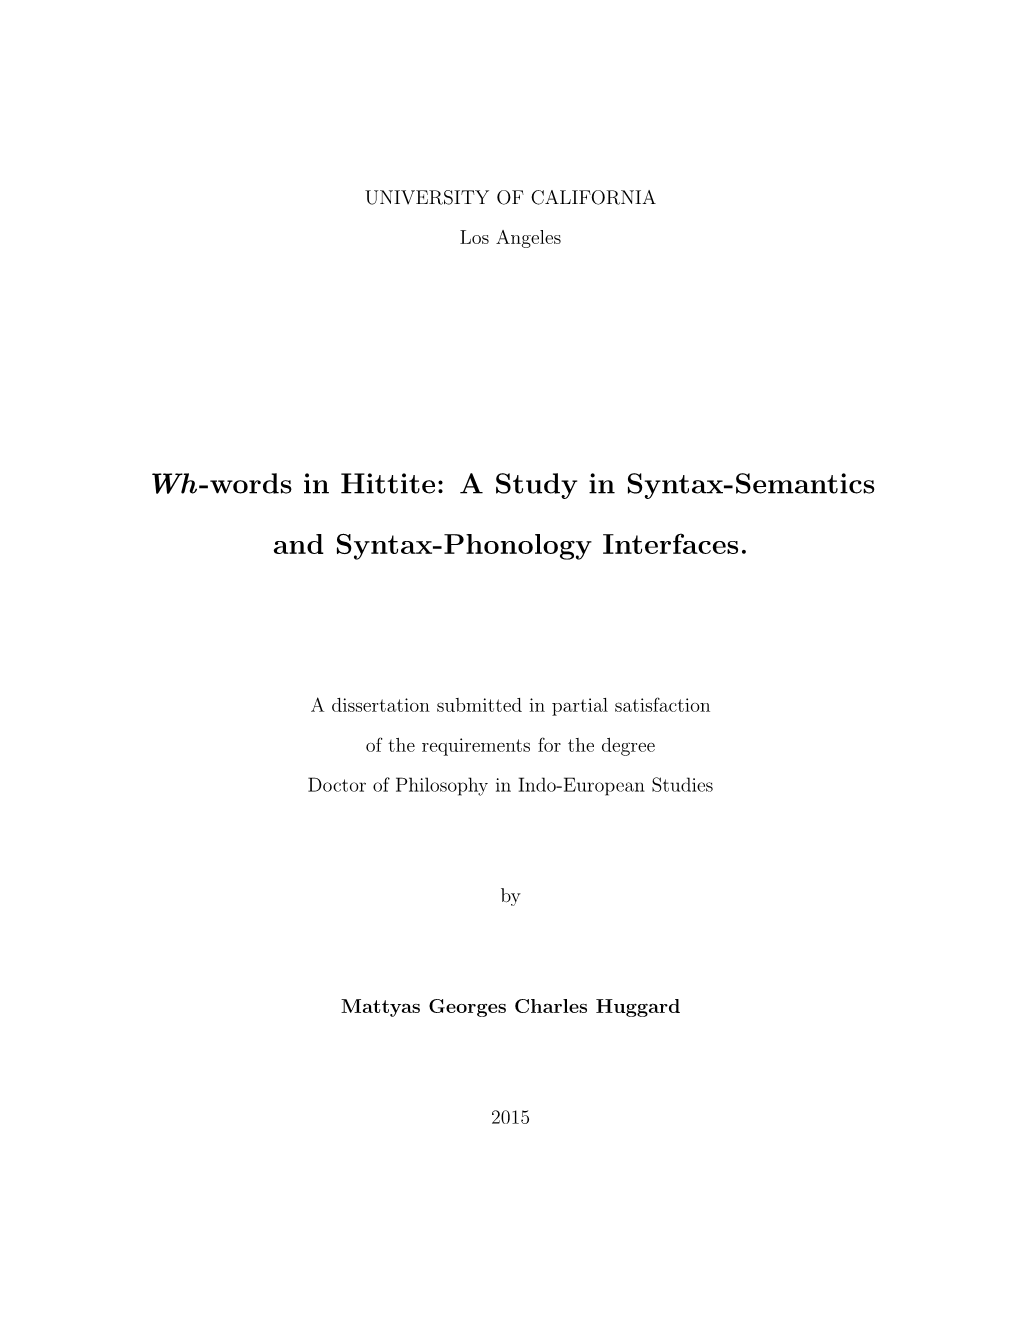 Wh-Words in Hittite: a Study in Syntax-Semantics